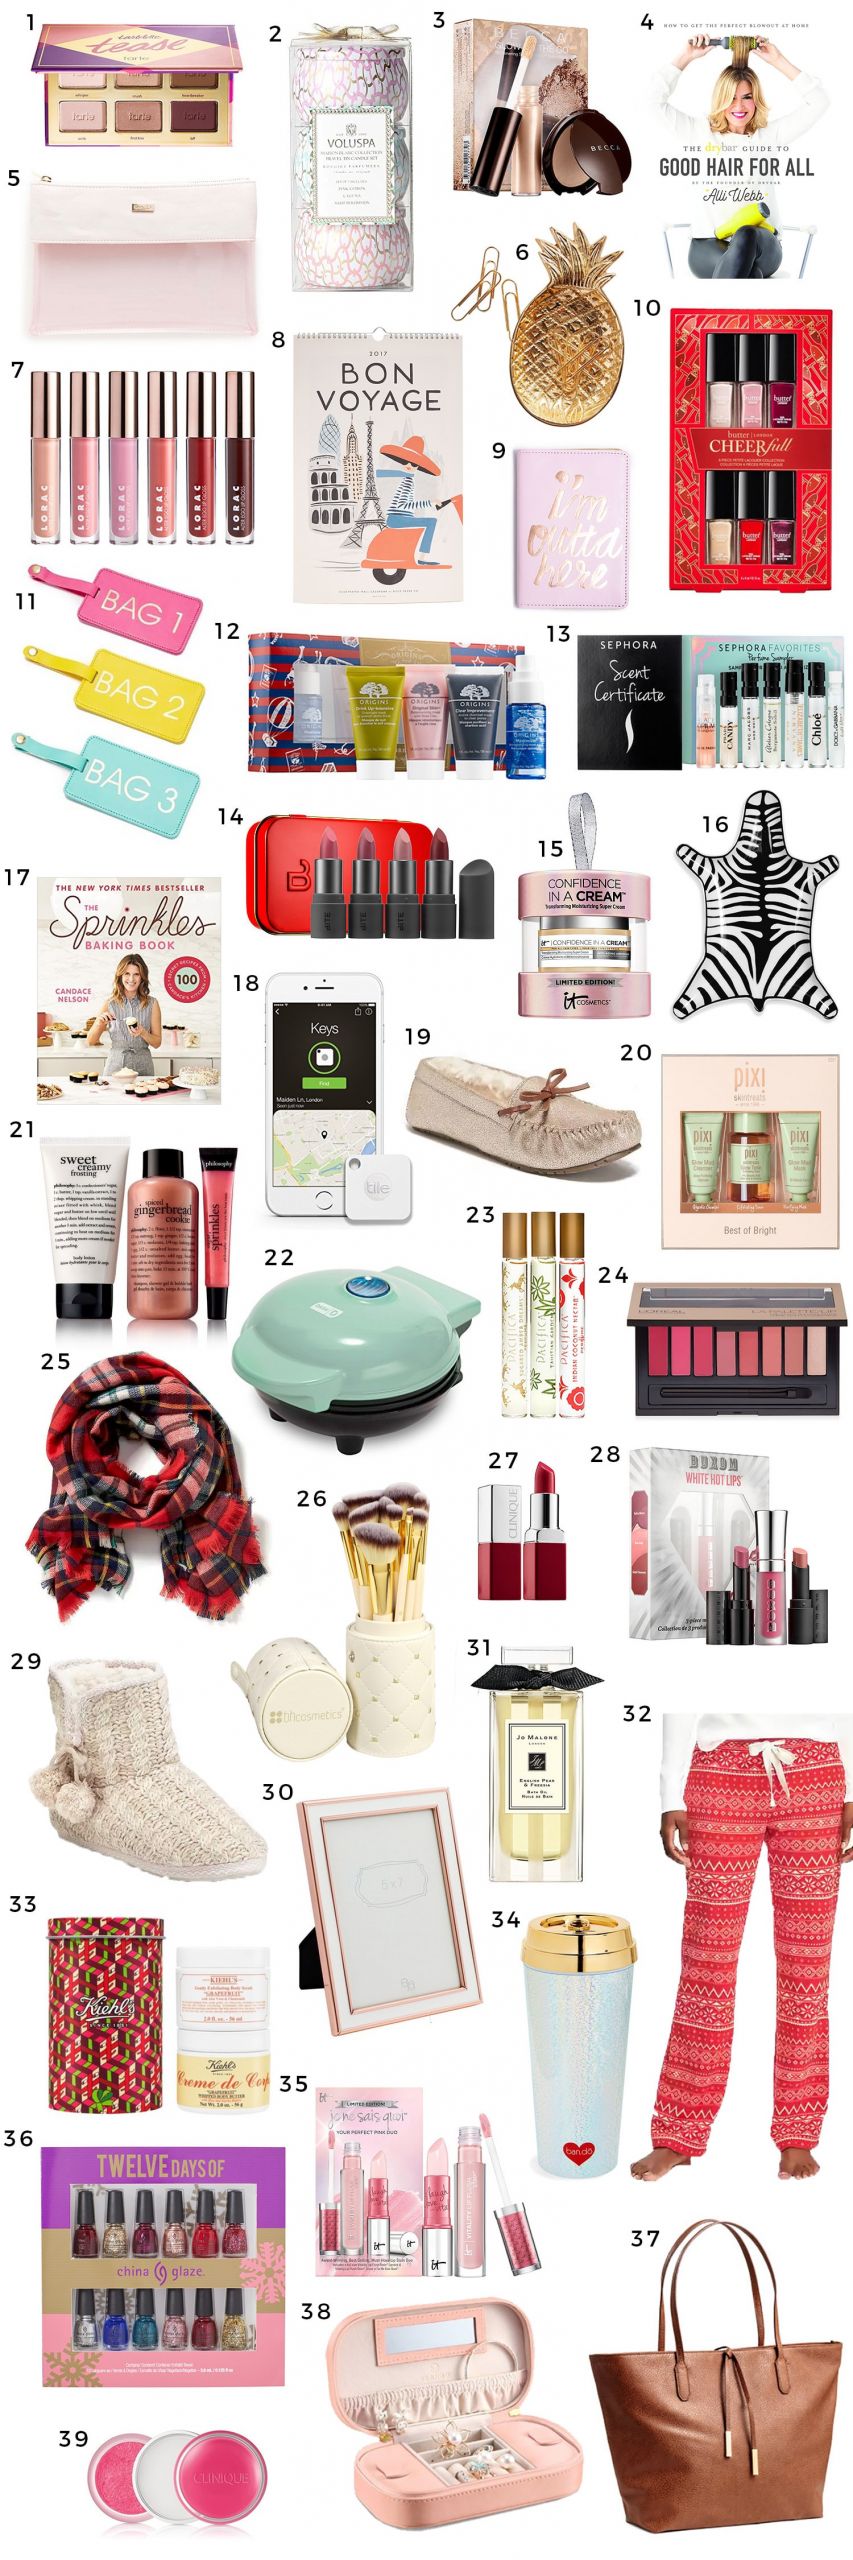 Holiday Gift Ideas For Women
 The Best Christmas Gift Ideas for Women under $25